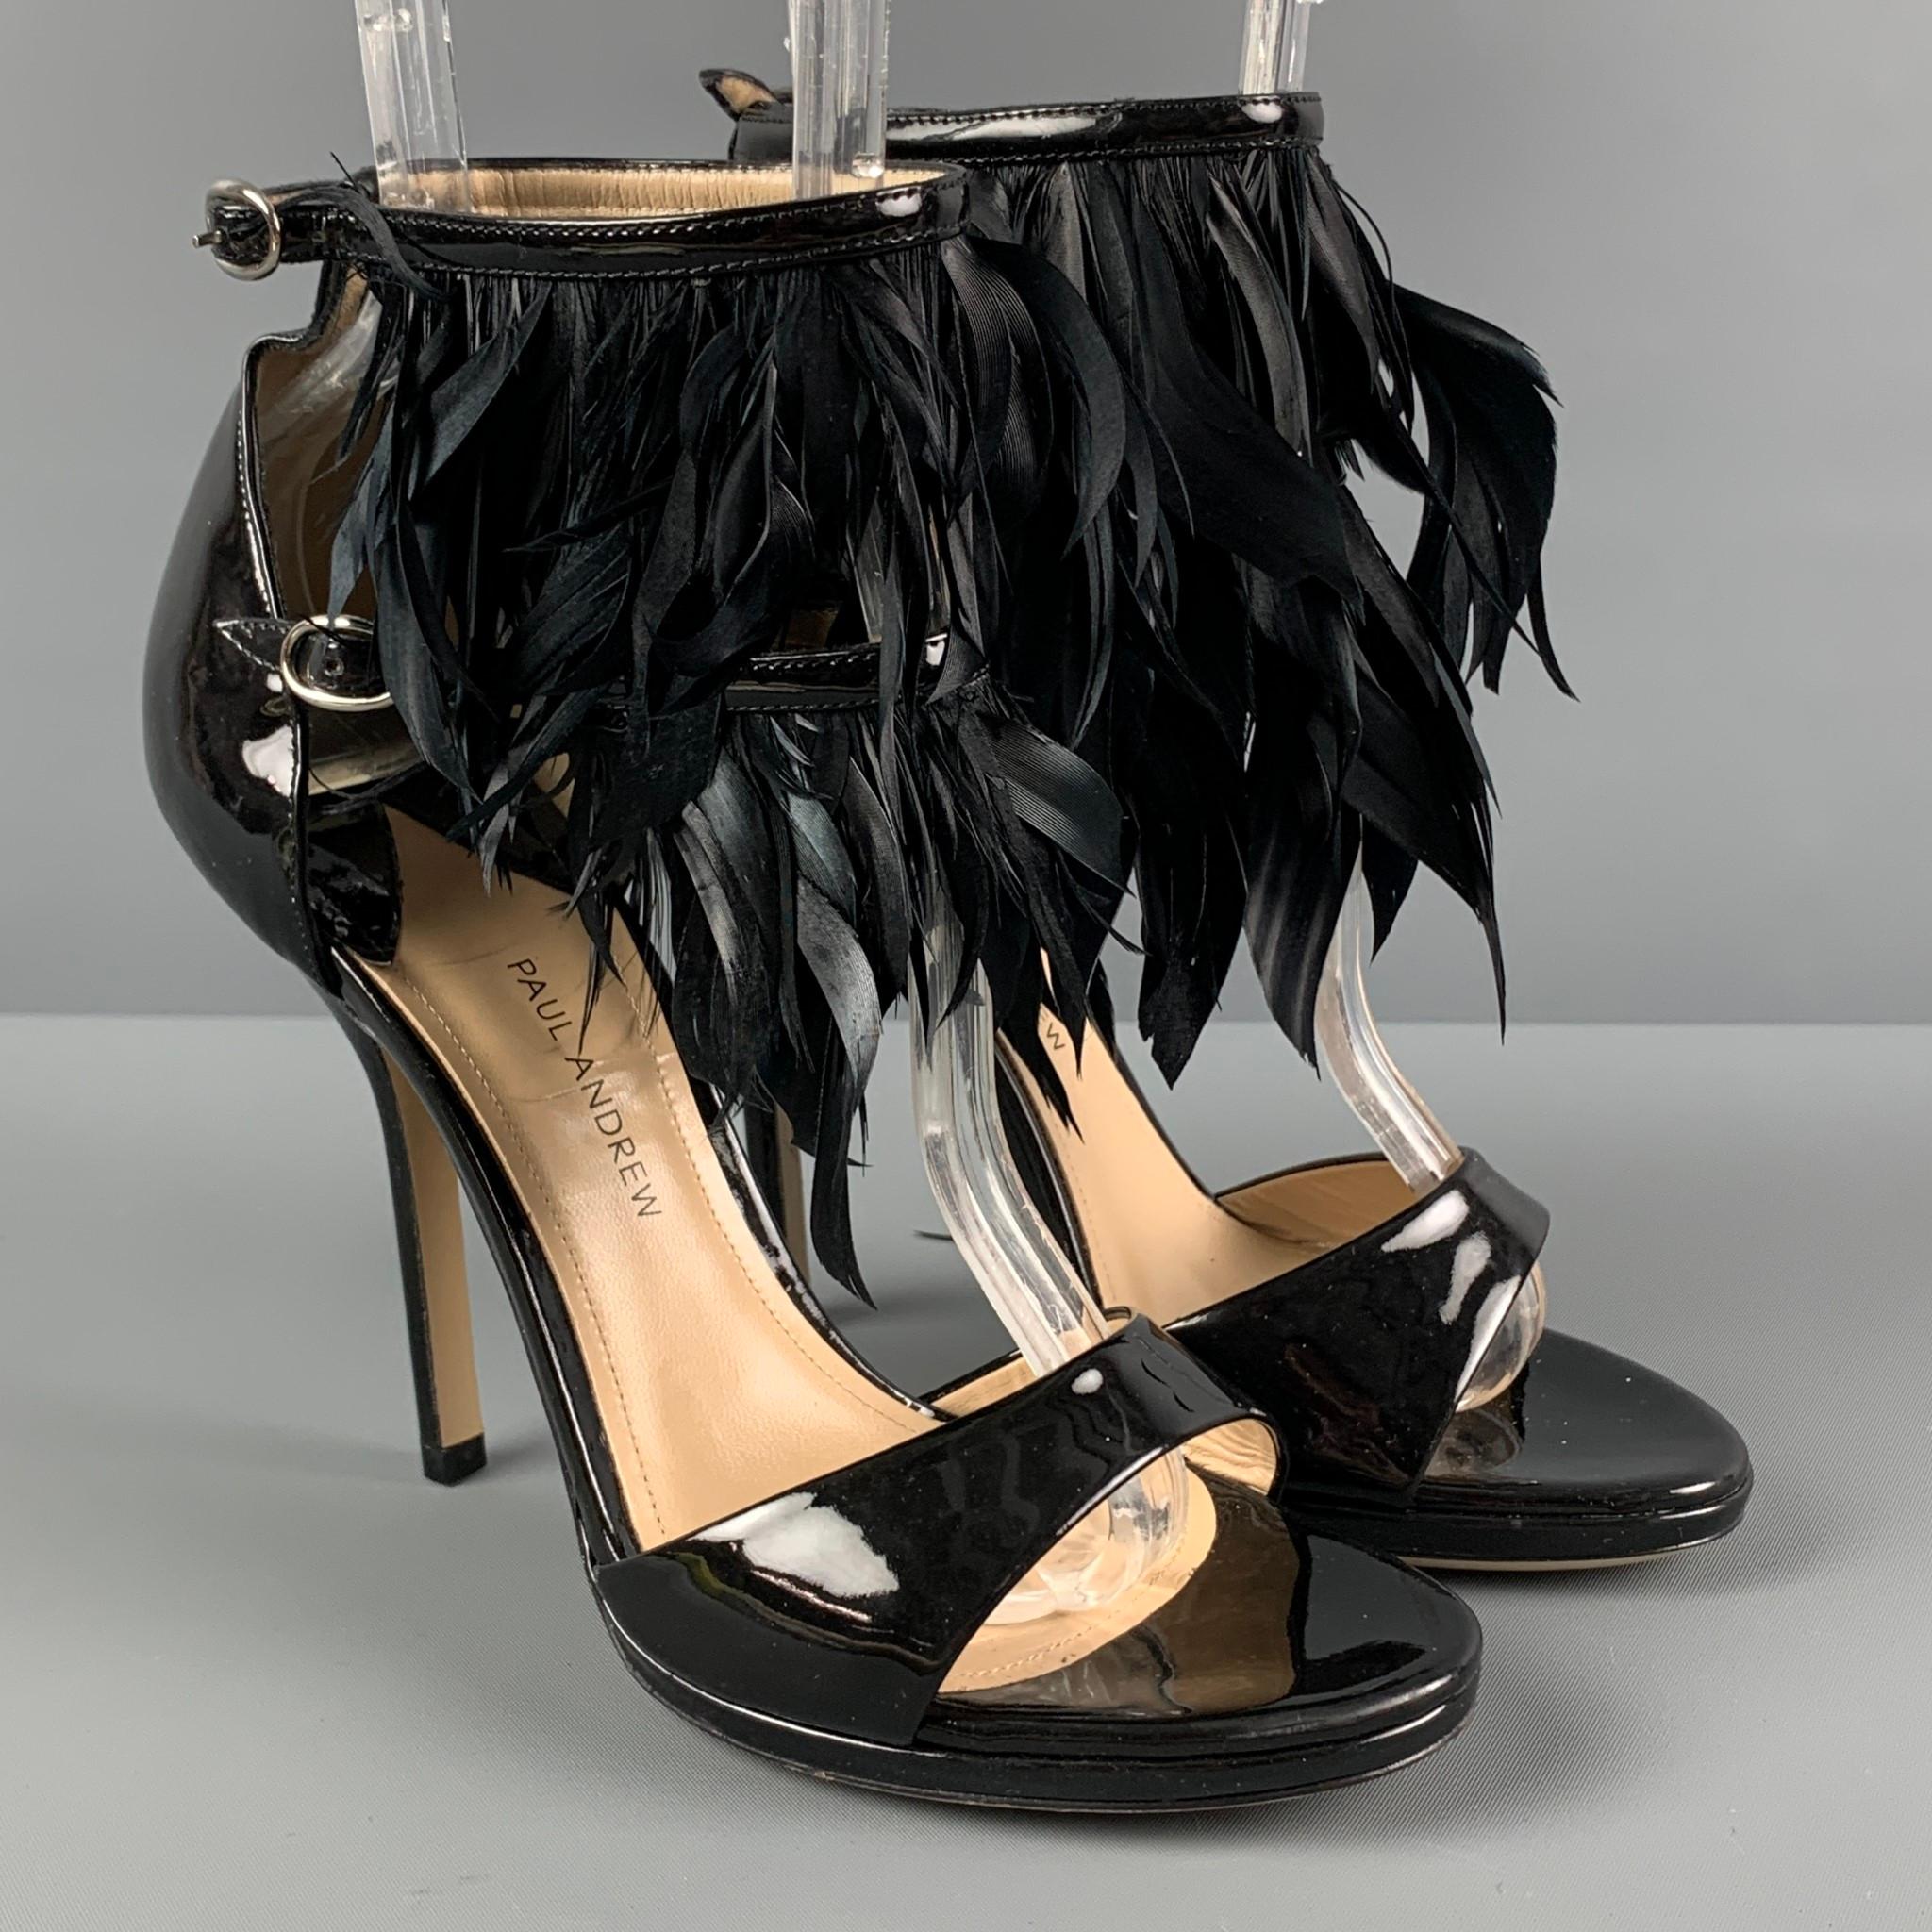 PAUL ANDREW sandals comes in a black patent leather featuring a double feather strap design, open toe, and a stiletto heel. Made in Italy. 

New Without Tags.
Marked: 36
Original Retail Price: $1,395.00

Measurements:

Heel: 4.5 in.